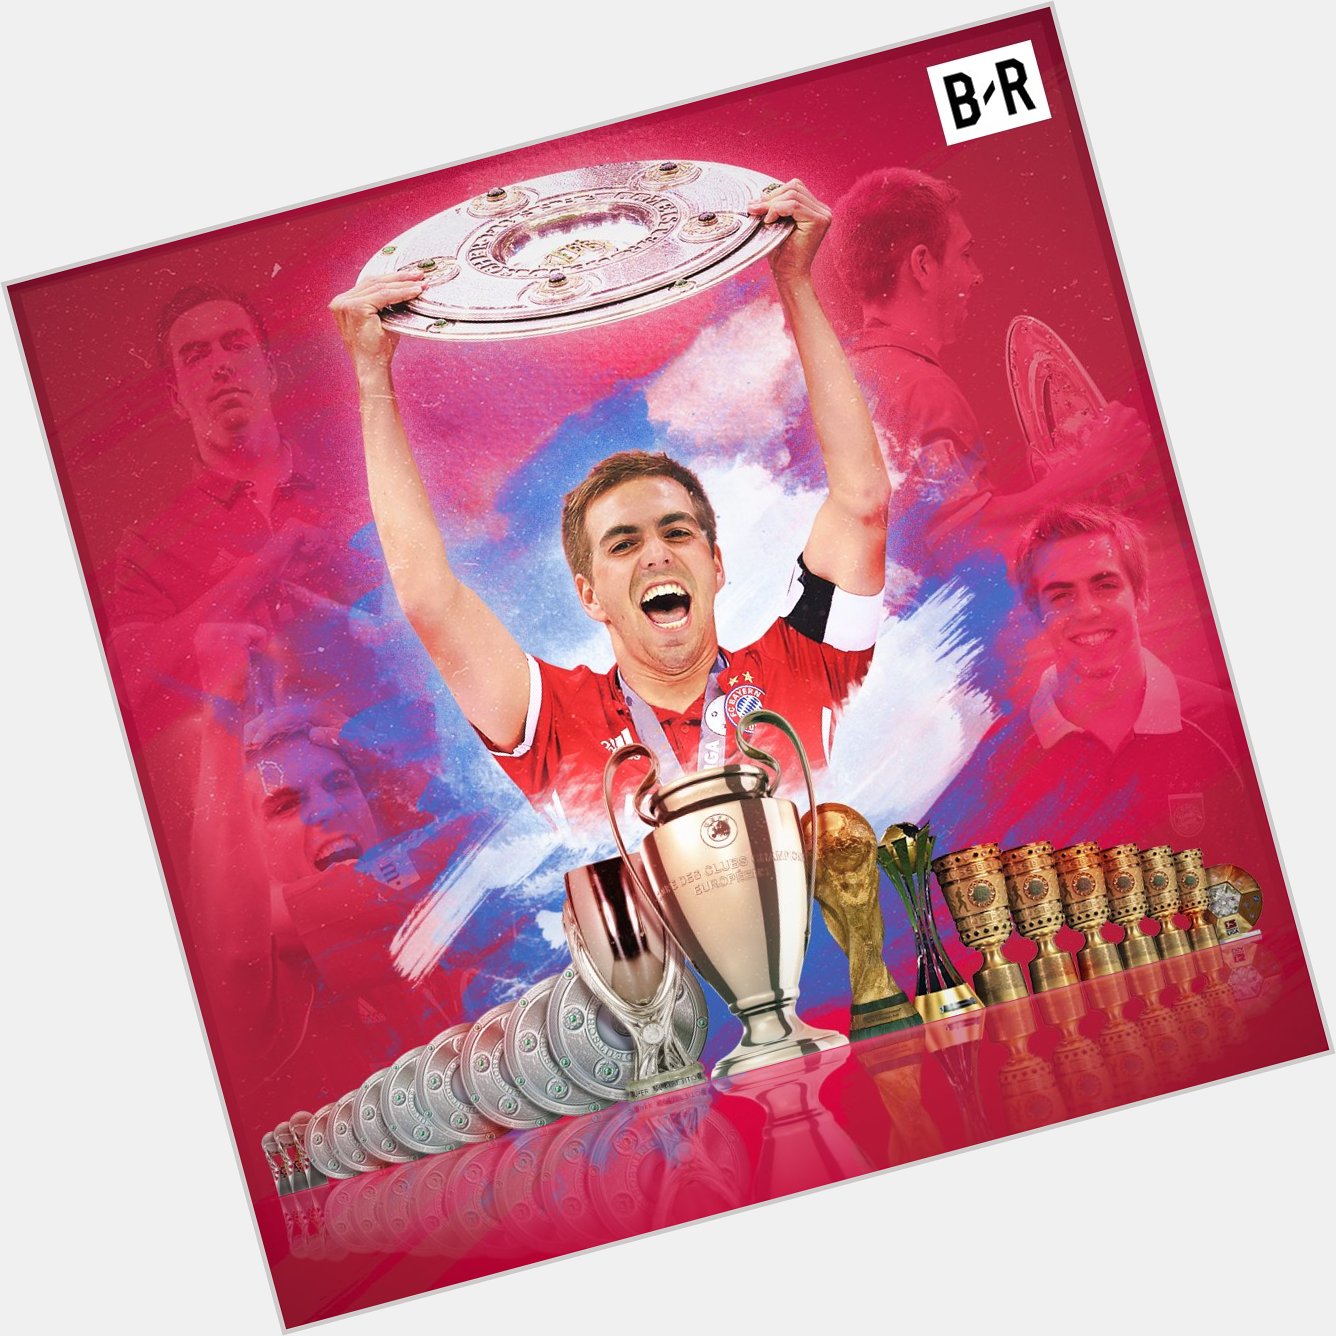 Happy 39th birthday to Bayern and Germany legend Philipp Lahm! What a career 